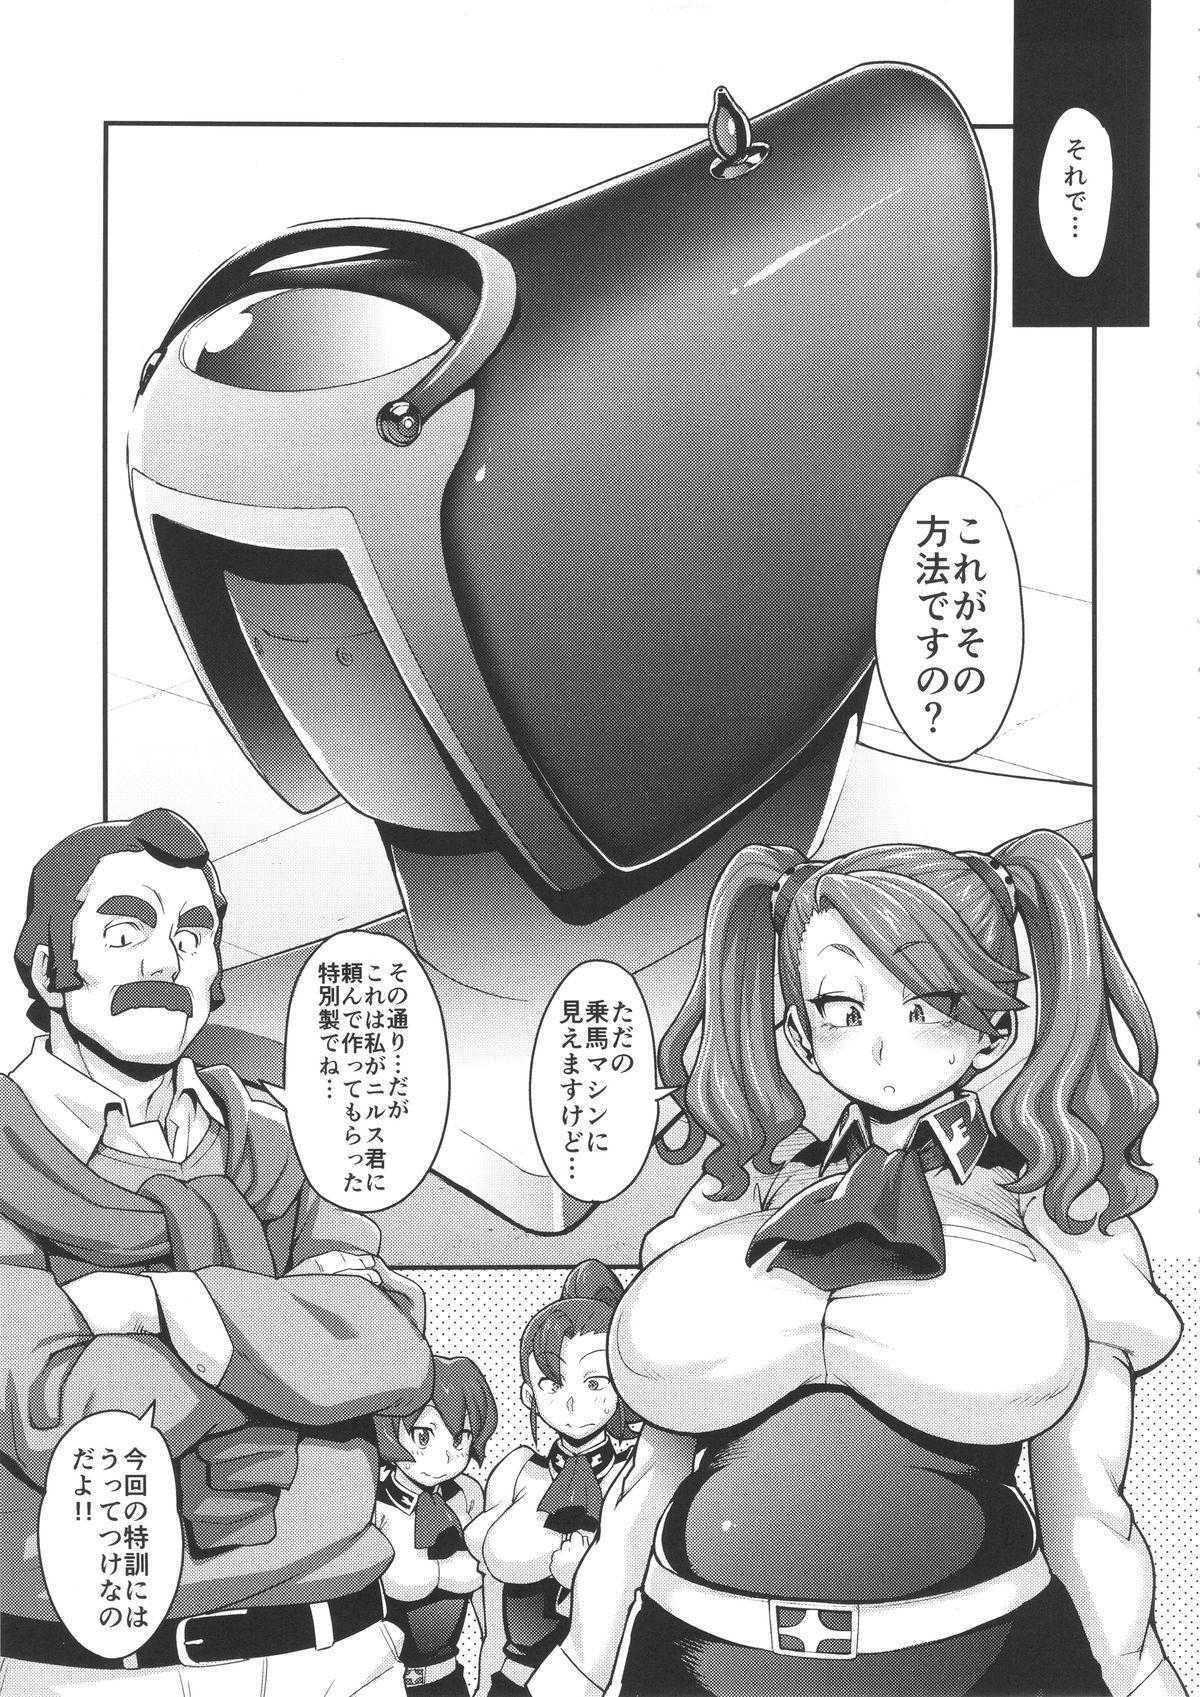 Relax SHIRITSUBO - Gundam build fighters try Solo Female - Page 6